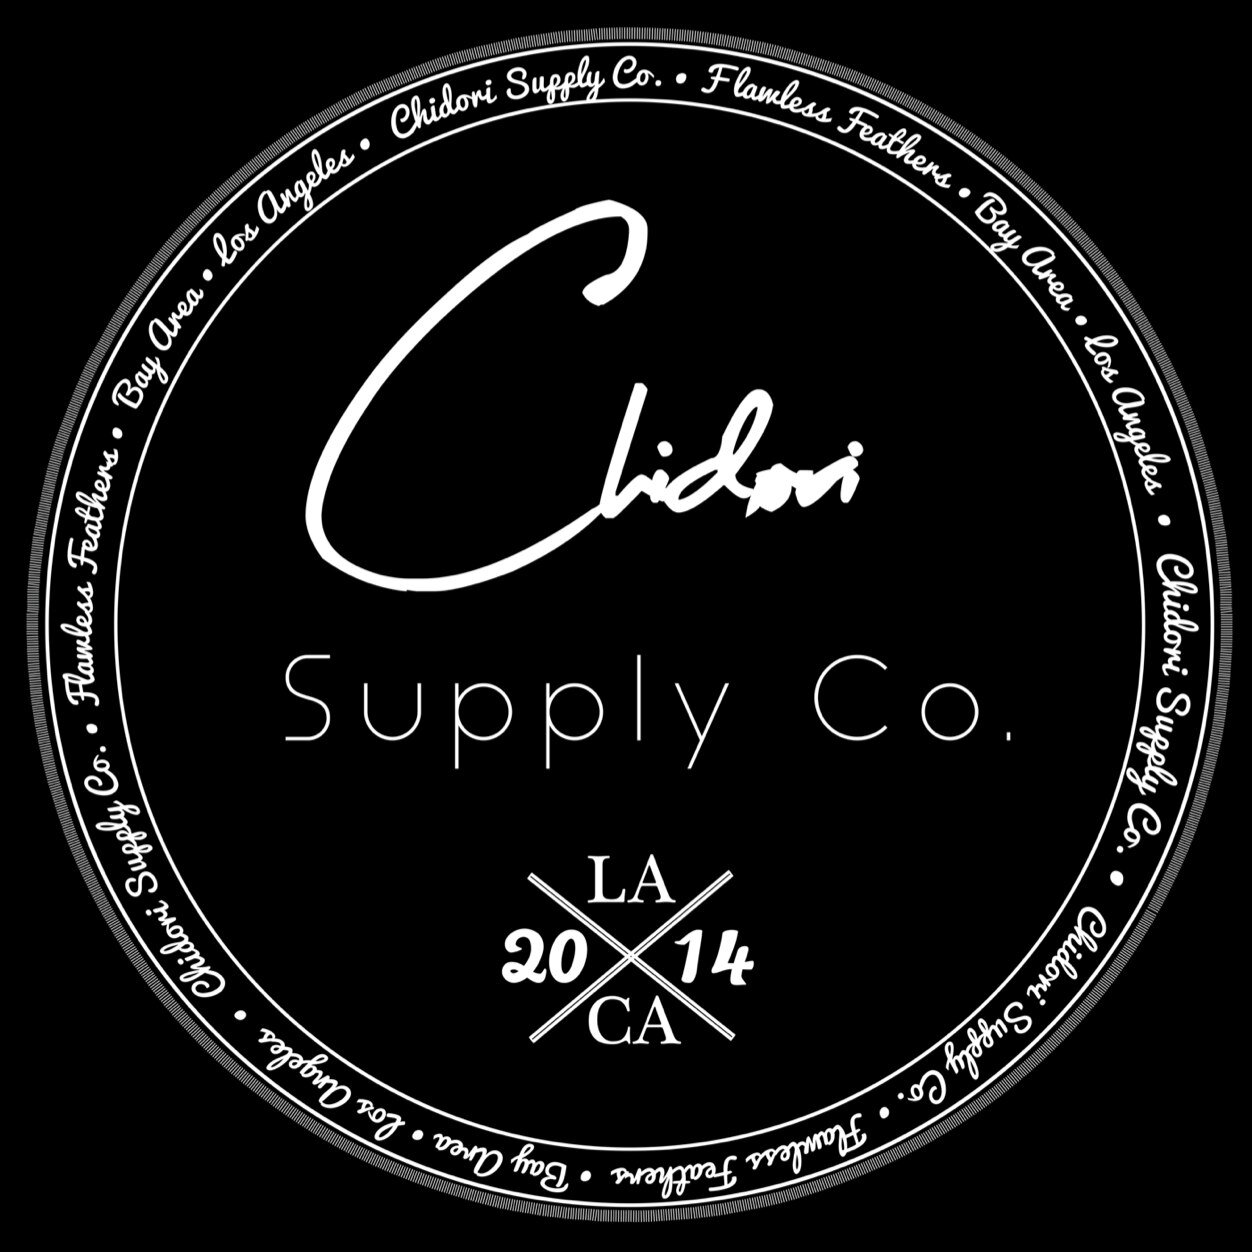 Bringing you streetwear straight out of the Bay / LA Official Twitter for Chidori Supply Co. Instagram: Chidoriiii Facebook: Chidori Supply Co.